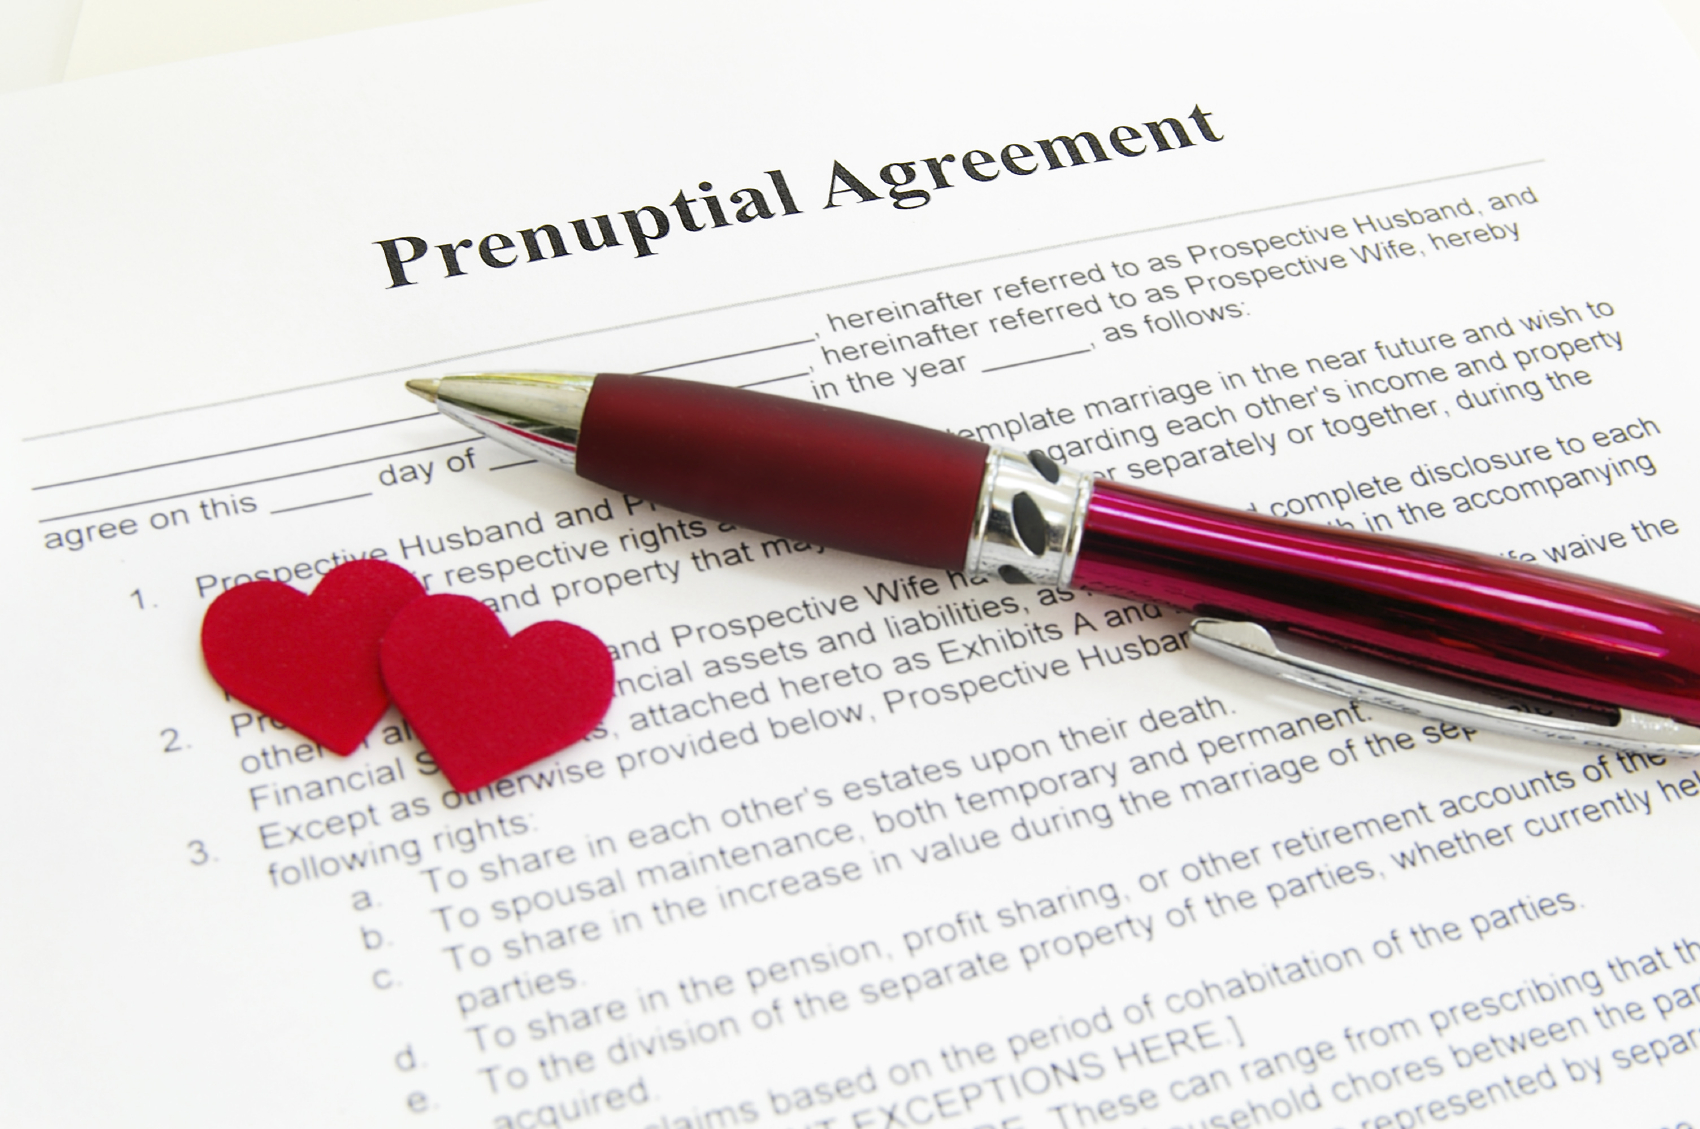 Prenuptial Agreements: Why Women Need Them